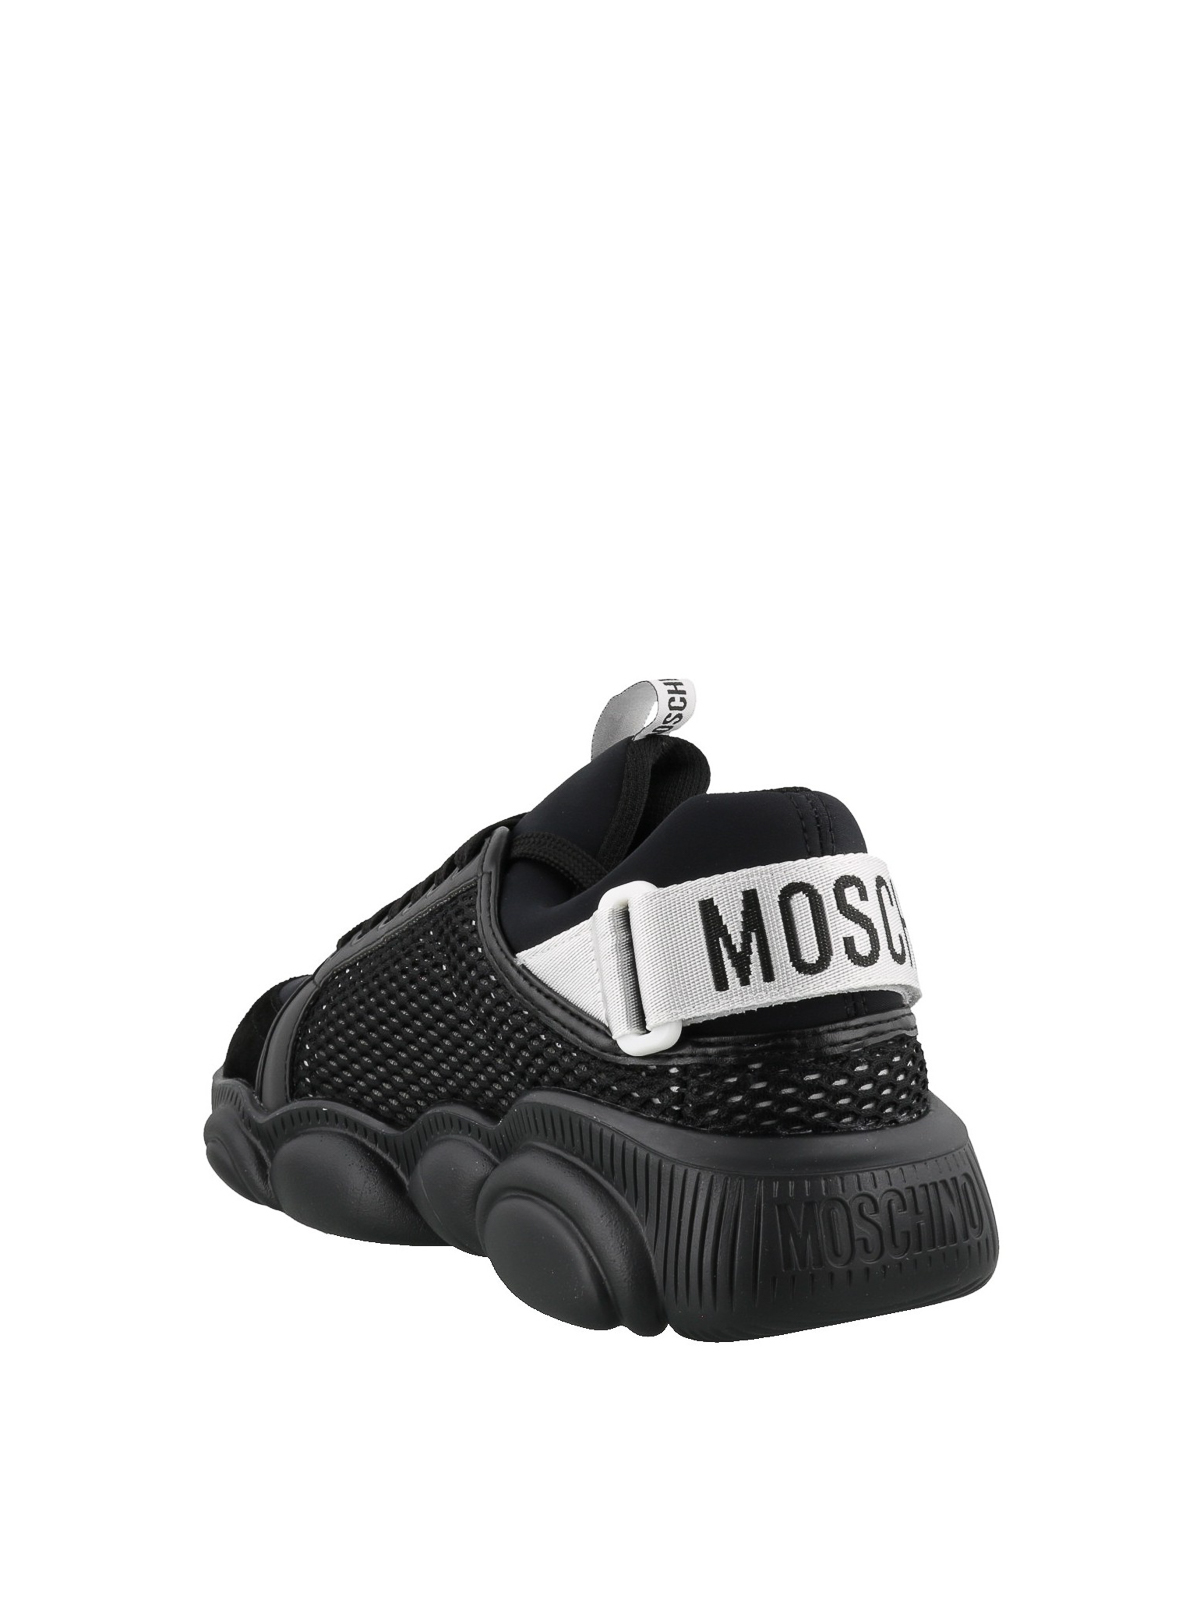 Moschino - Teddy mesh and suede detail 